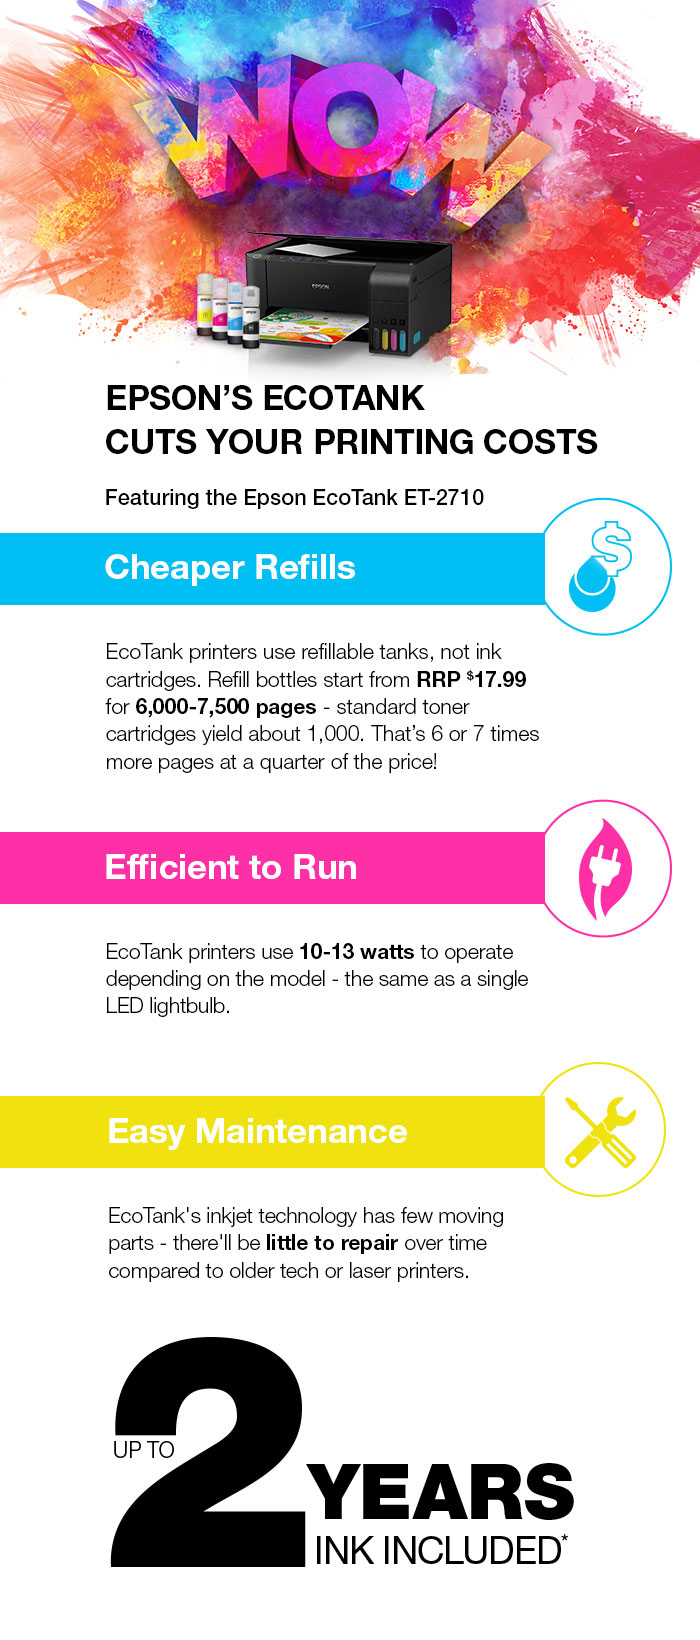 Epson Ecotank Cuts Your Printing Costs